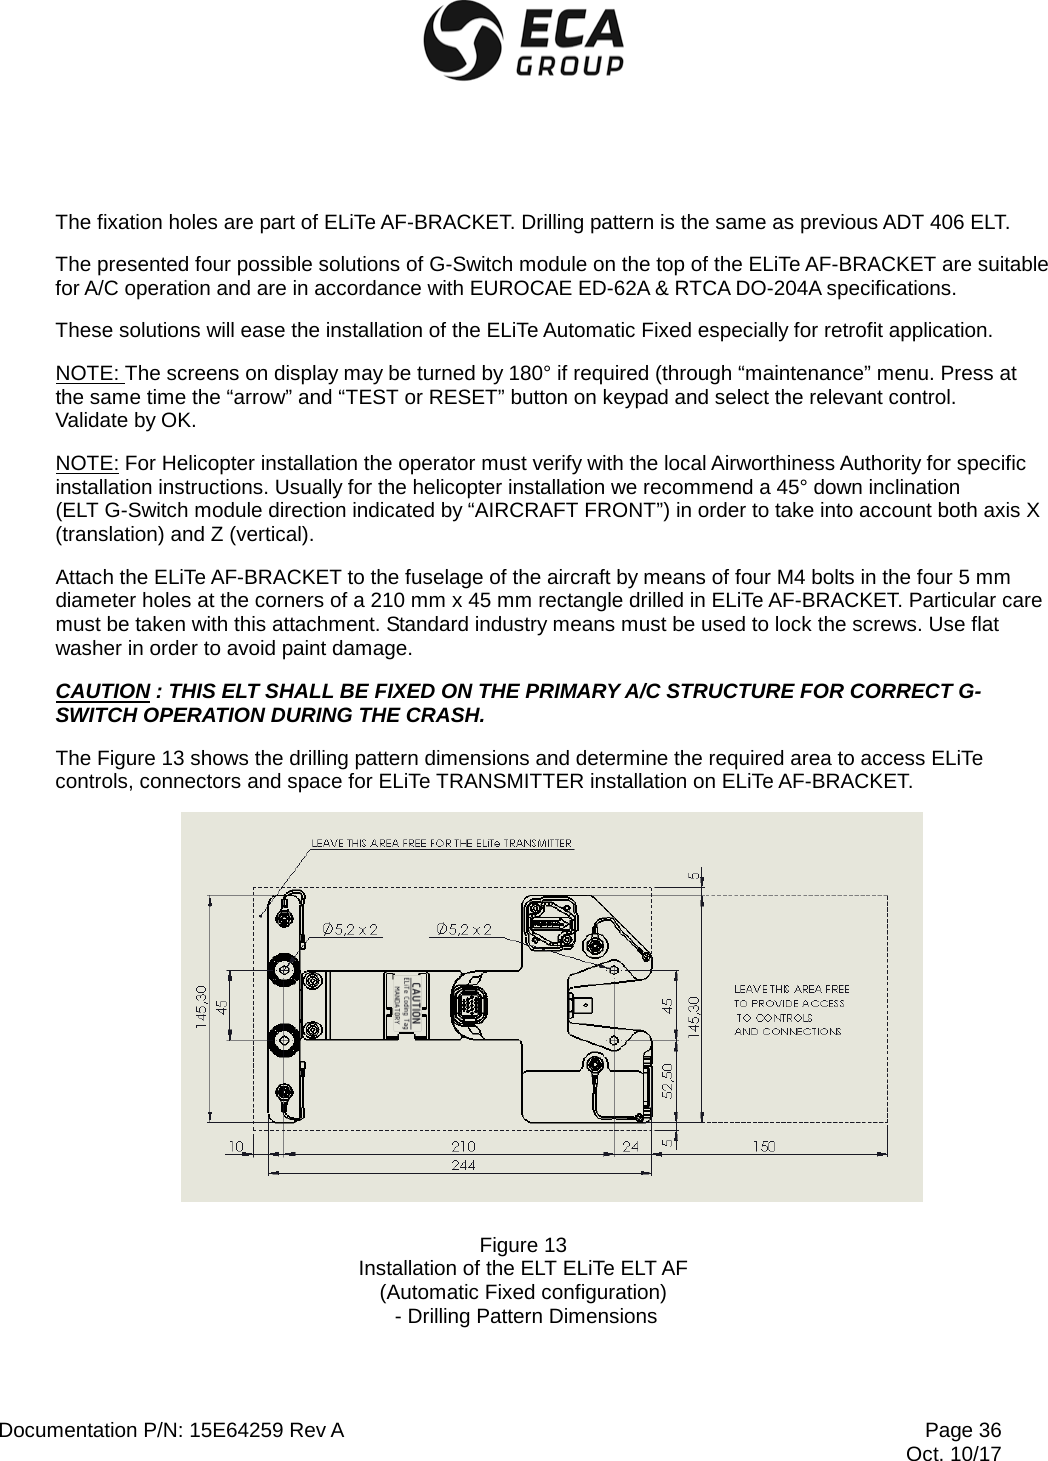  Documentation P/N: 15E64259 Rev A Page 36  Oct. 10/17 The fixation holes are part of ELiTe AF-BRACKET. Drilling pattern is the same as previous ADT 406 ELT. The presented four possible solutions of G-Switch module on the top of the ELiTe AF-BRACKET are suitable for A/C operation and are in accordance with EUROCAE ED-62A &amp; RTCA DO-204A specifications. These solutions will ease the installation of the ELiTe Automatic Fixed especially for retrofit application. NOTE: The screens on display may be turned by 180° if required (through “maintenance” menu. Press at the same time the “arrow” and “TEST or RESET” button on keypad and select the relevant control.  Validate by OK. NOTE: For Helicopter installation the operator must verify with the local Airworthiness Authority for specific installation instructions. Usually for the helicopter installation we recommend a 45° down inclination  (ELT G-Switch module direction indicated by “AIRCRAFT FRONT”) in order to take into account both axis X (translation) and Z (vertical). Attach the ELiTe AF-BRACKET to the fuselage of the aircraft by means of four M4 bolts in the four 5 mm diameter holes at the corners of a 210 mm x 45 mm rectangle drilled in ELiTe AF-BRACKET. Particular care must be taken with this attachment. Standard industry means must be used to lock the screws. Use flat washer in order to avoid paint damage. CAUTION : THIS ELT SHALL BE FIXED ON THE PRIMARY A/C STRUCTURE FOR CORRECT G-SWITCH OPERATION DURING THE CRASH. The Figure 13 shows the drilling pattern dimensions and determine the required area to access ELiTe controls, connectors and space for ELiTe TRANSMITTER installation on ELiTe AF-BRACKET.   Figure 13 Installation of the ELT ELiTe ELT AF (Automatic Fixed configuration)  - Drilling Pattern Dimensions 